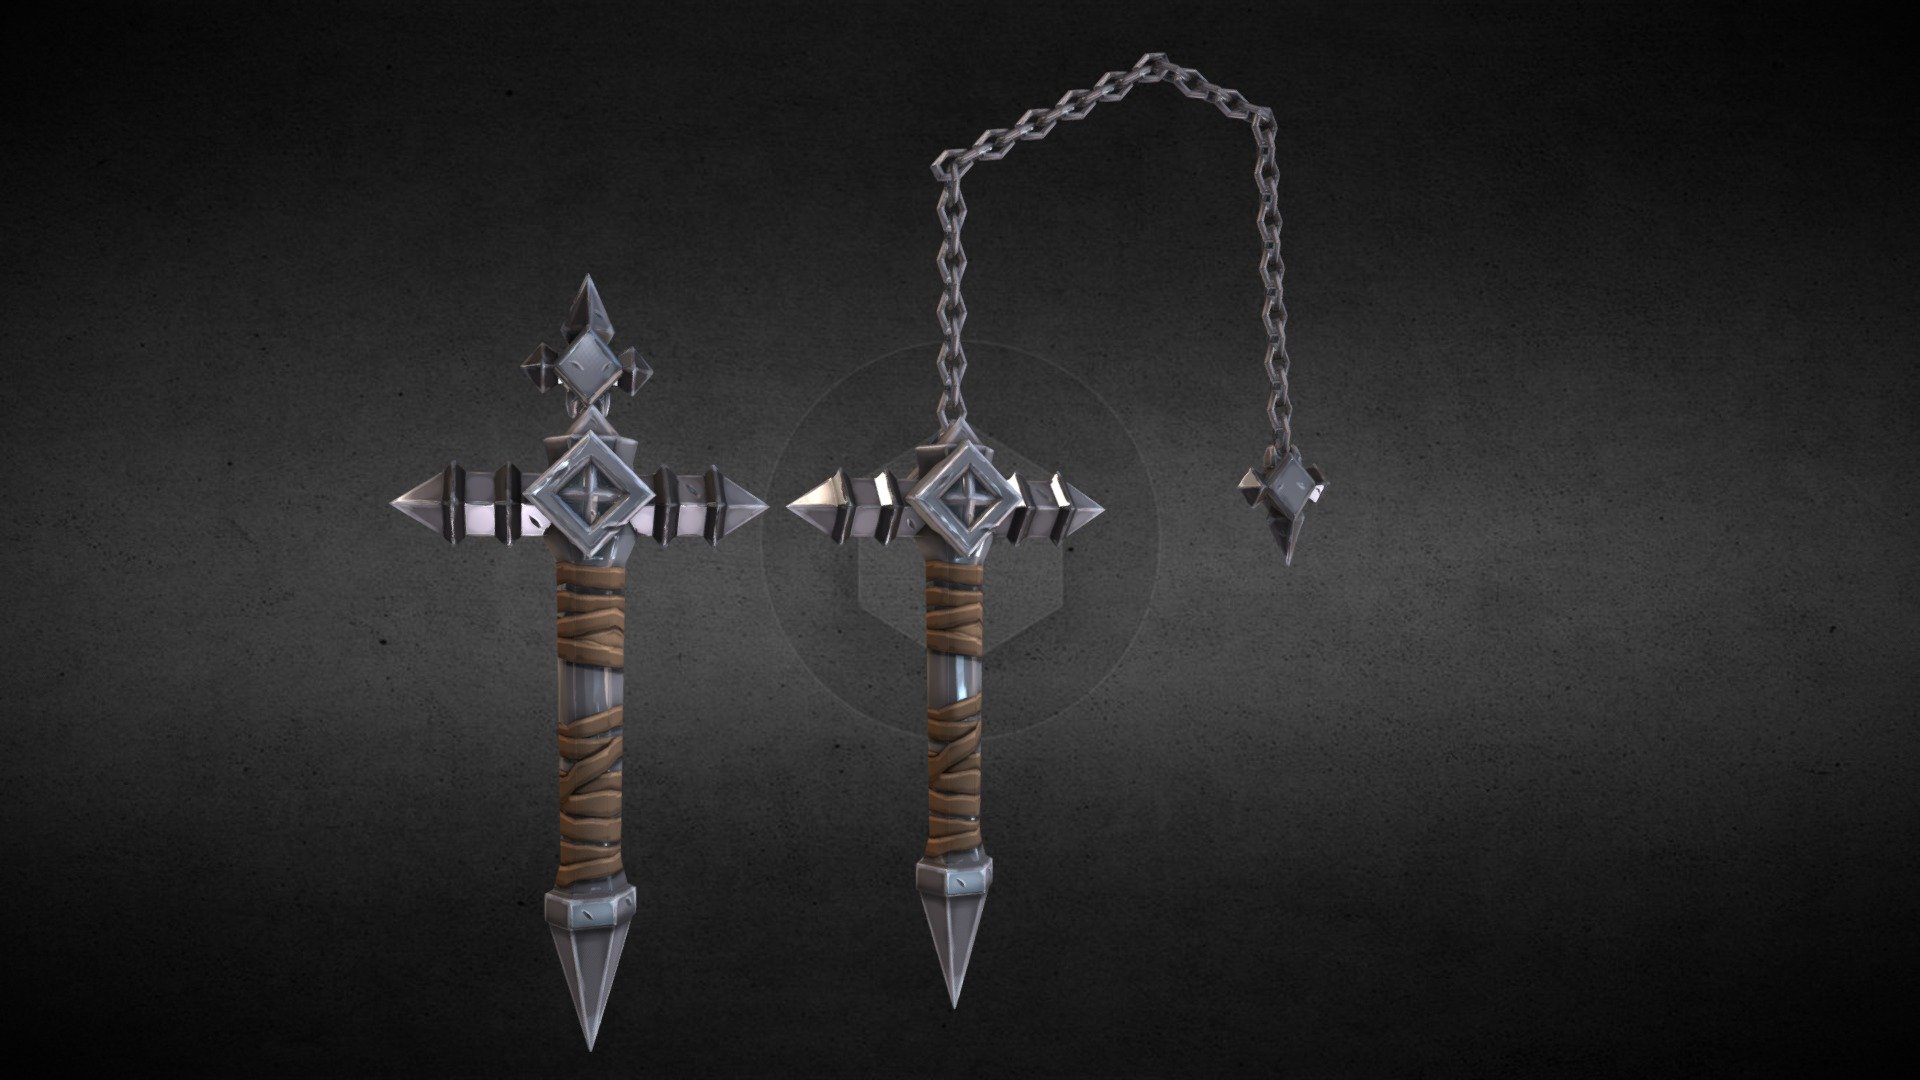 The Lord of shadows Whip of the Belmont Family from Castlevania LOS made as a practice ready for a game engine it has 1750 verts 1725 polys 3406 tris between the close and open version and the textures are 1024 x 1024 the textures are pbr and includes Diffuse, Specular, Normal map and AO if you need game assets for your games or STL files I am available for commission works 3d model